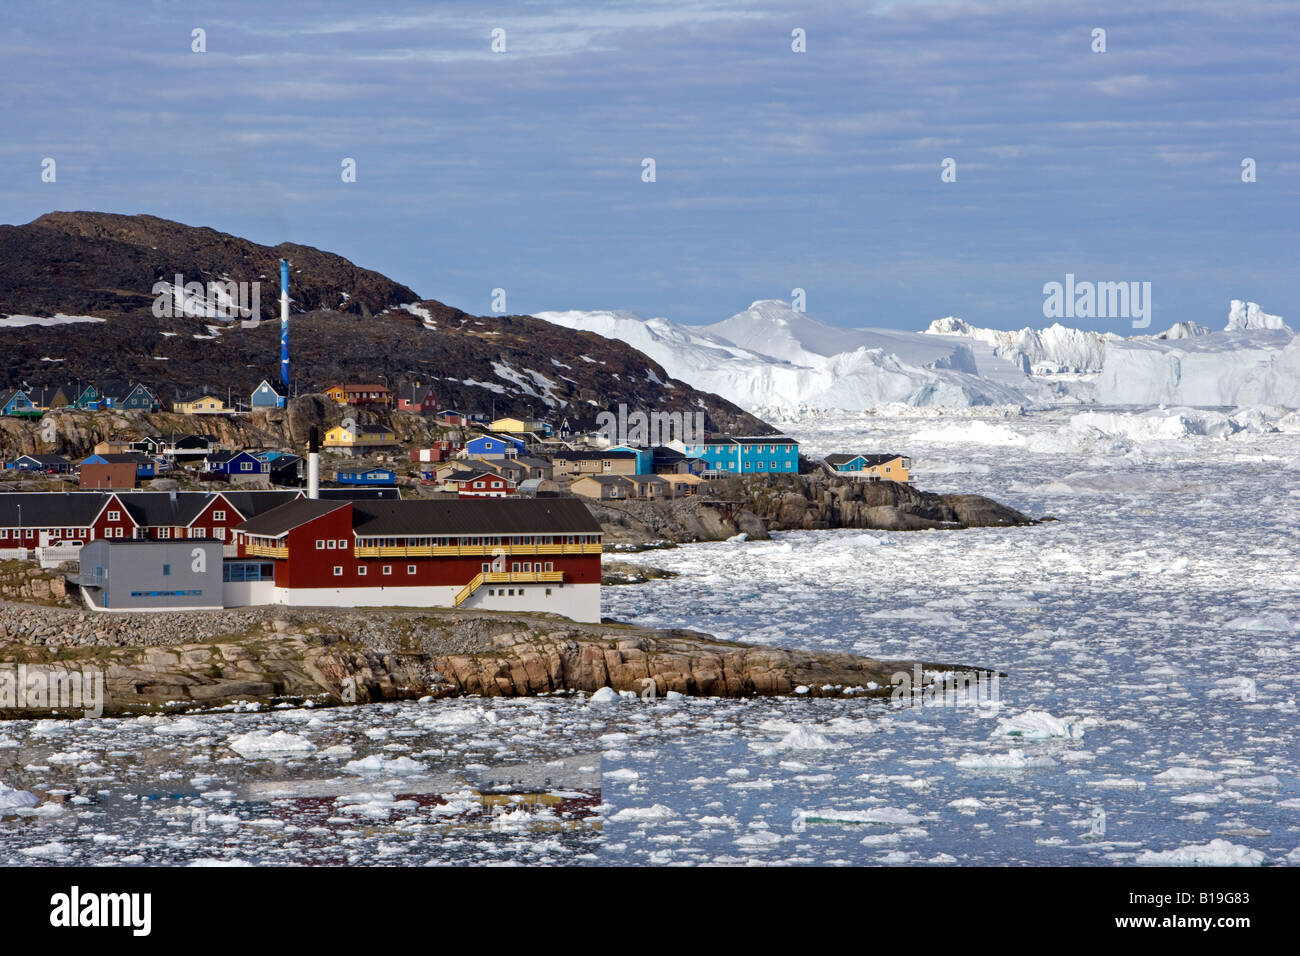 Greenland, Ilulissat, UNESCO World Heritage Site Icefjord.  The entrance to the port of the town showing scattered bergy bits. Stock Photo